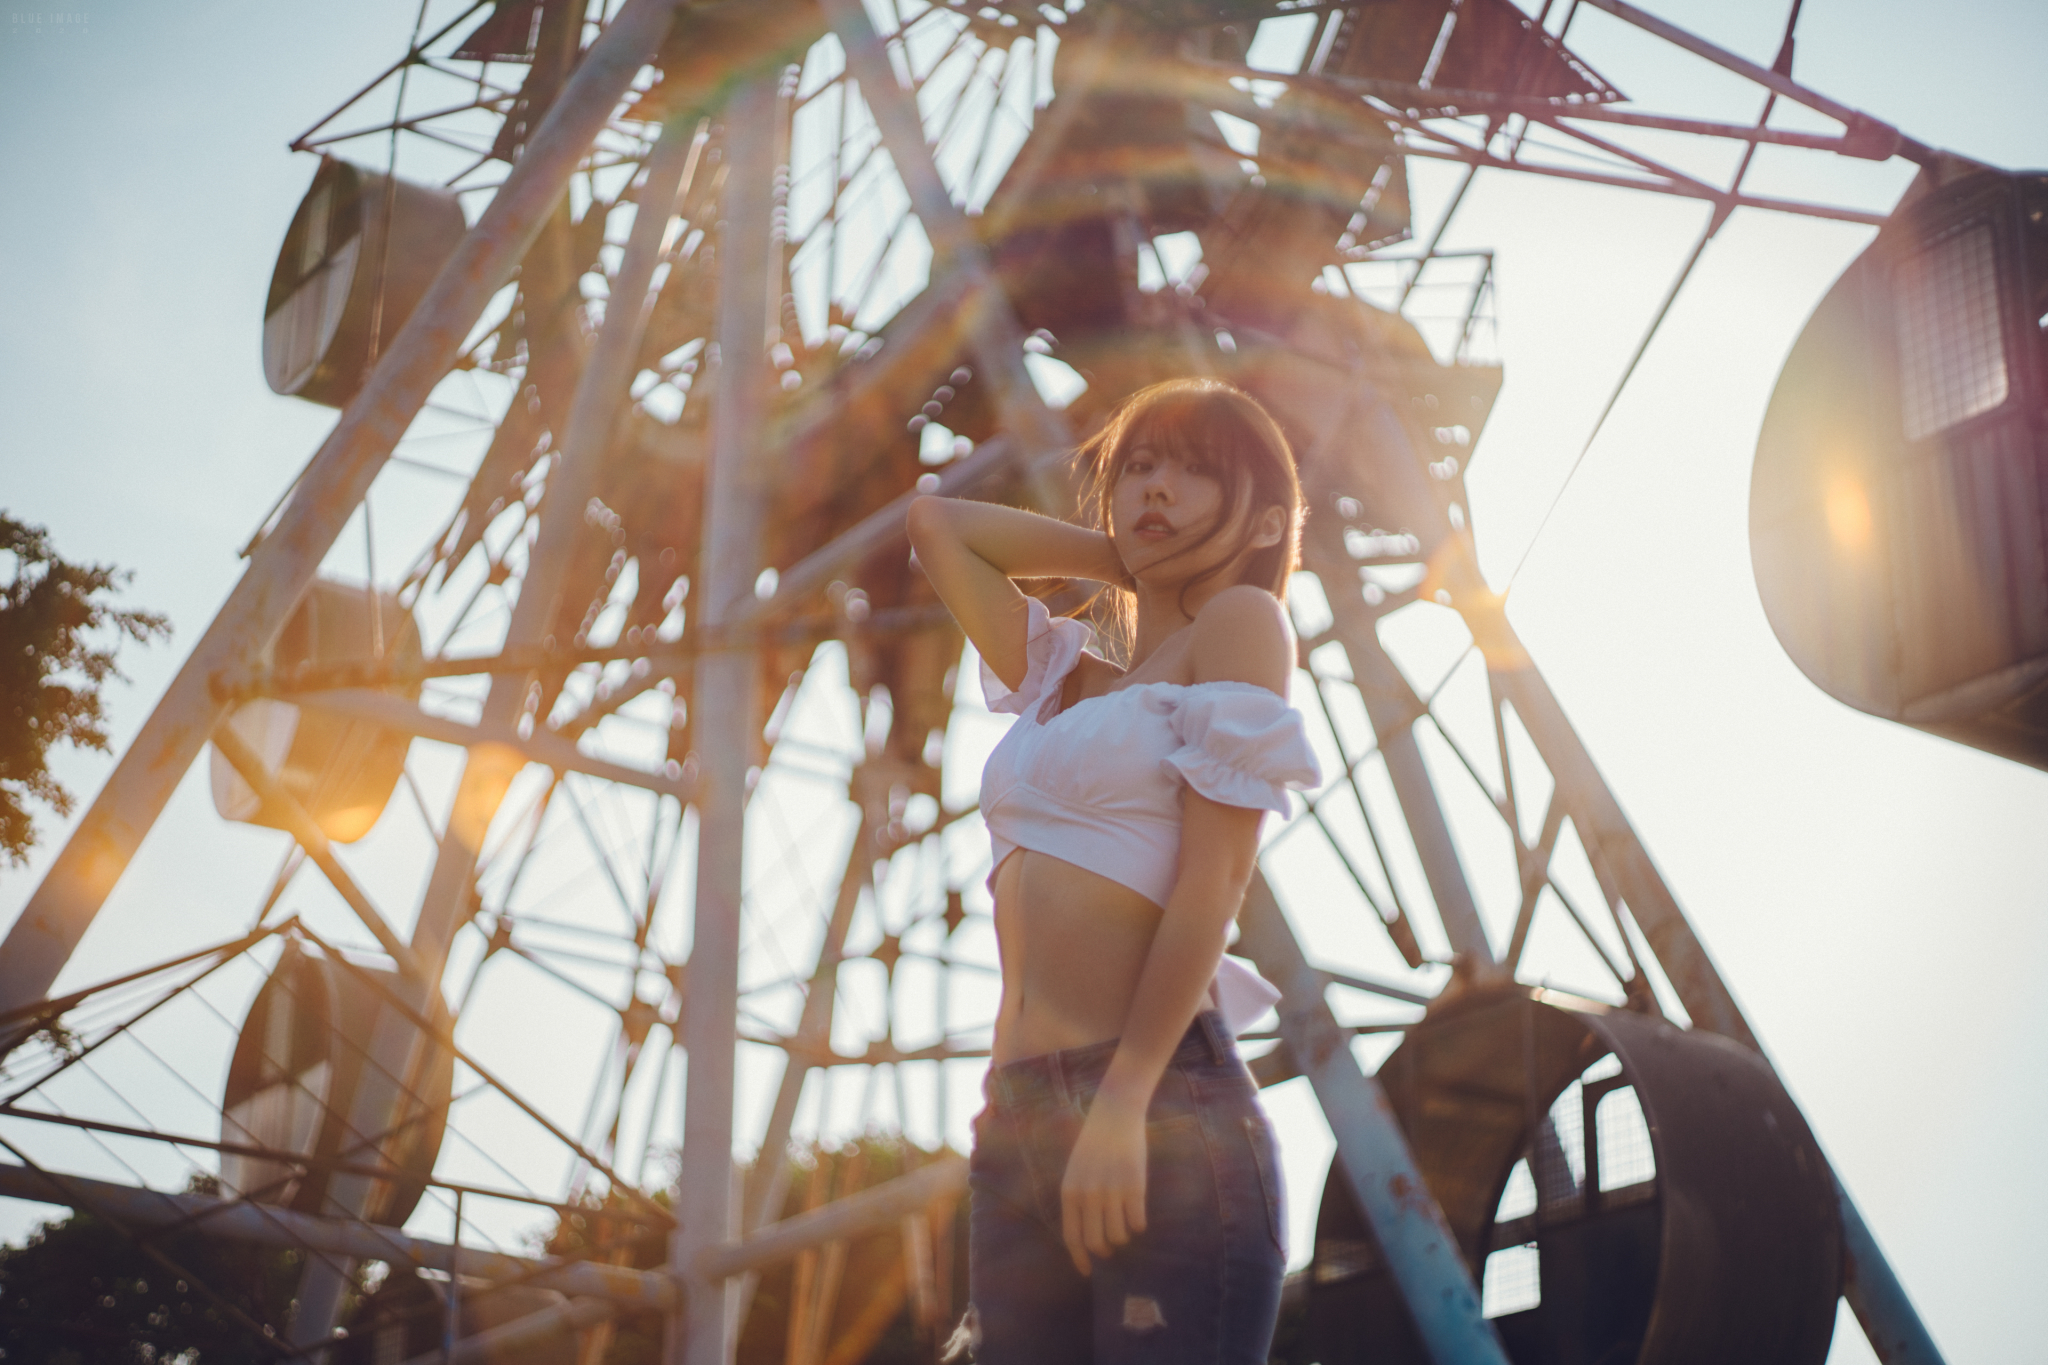 People 2048x1365 Asian women model brunette looking at viewer bare shoulders white tops jeans belly low-angle lens flare sunlight ferris wheel outdoors women outdoors sky torn jeans